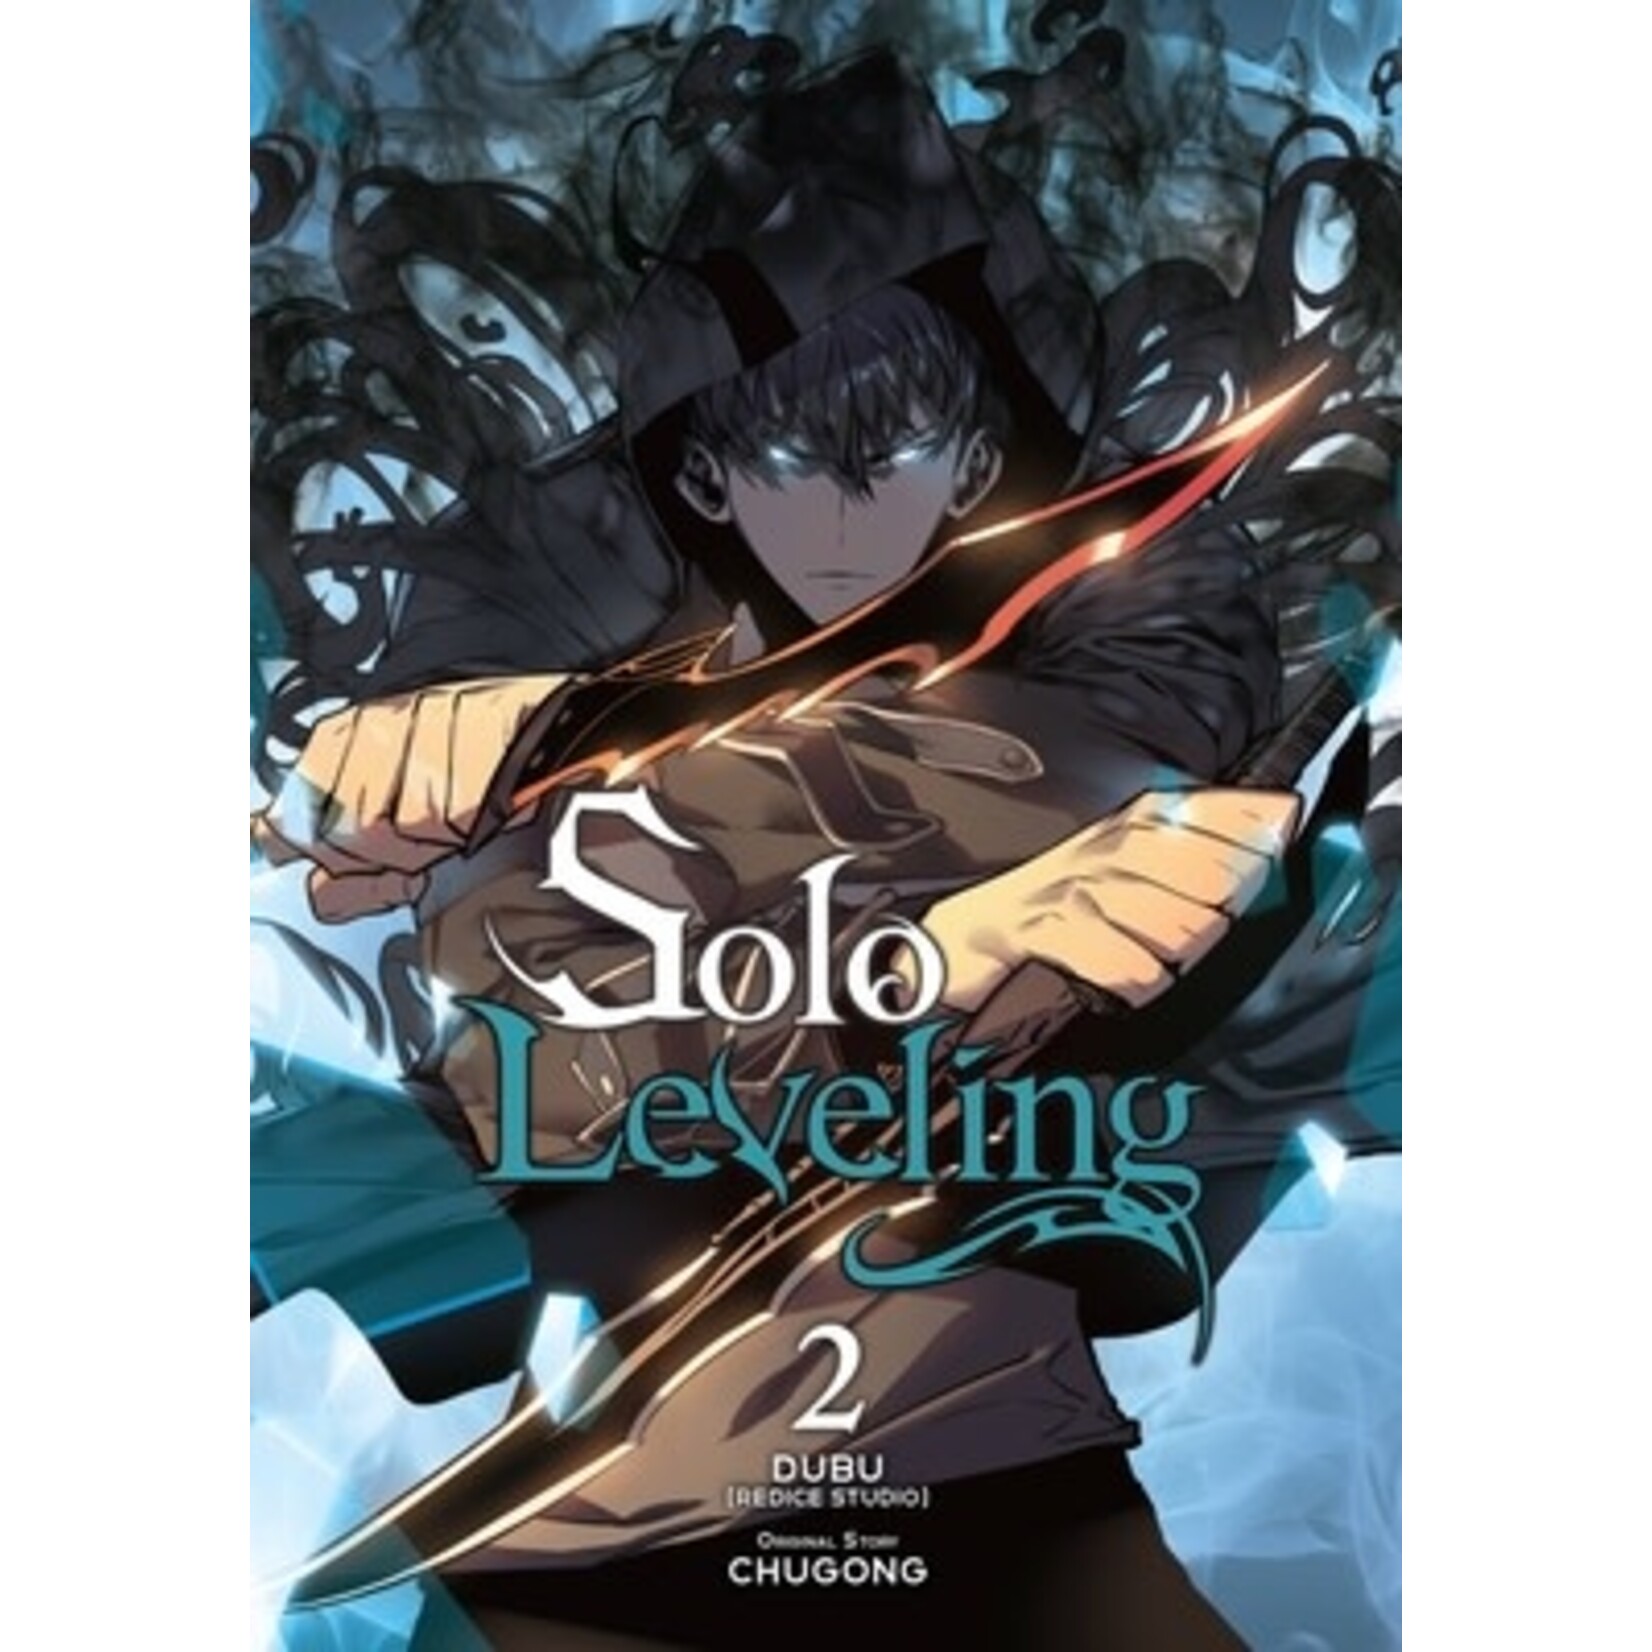 SOLO LEVELING GN VOL 02